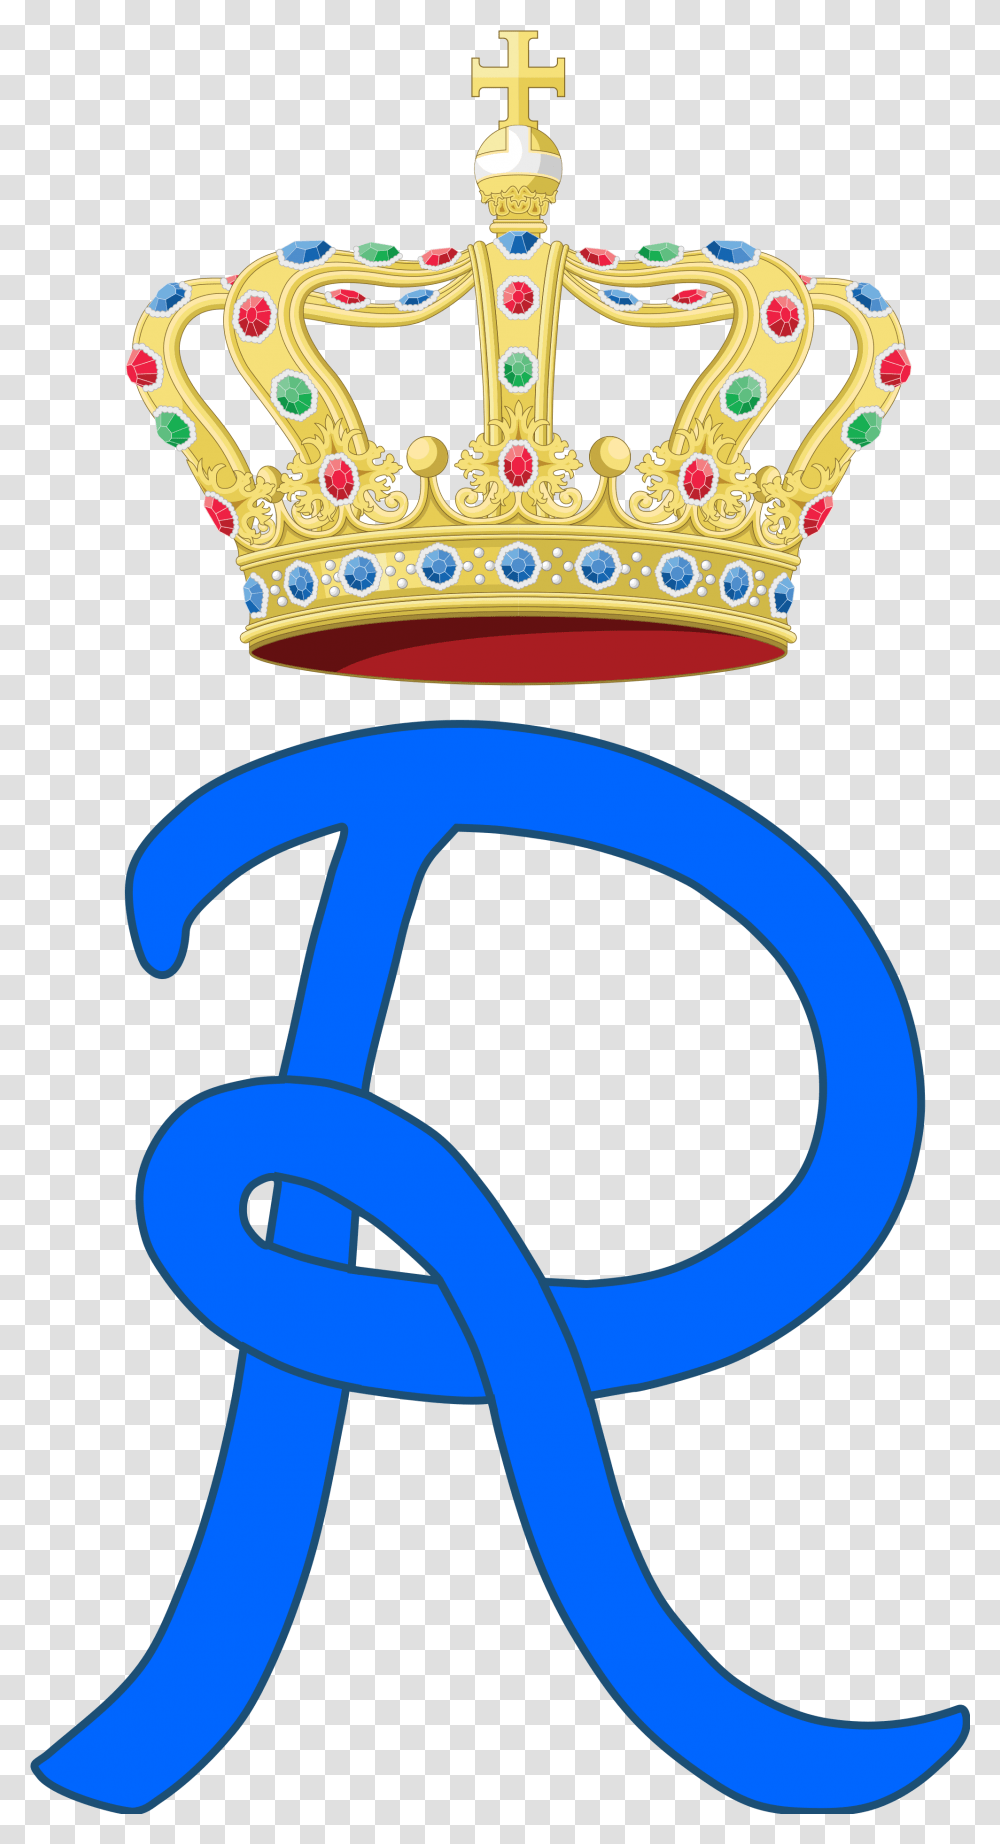 Letters R With Crowns Monogram Royal Family Prince Crown, Accessories, Accessory, Jewelry, Birthday Cake Transparent Png